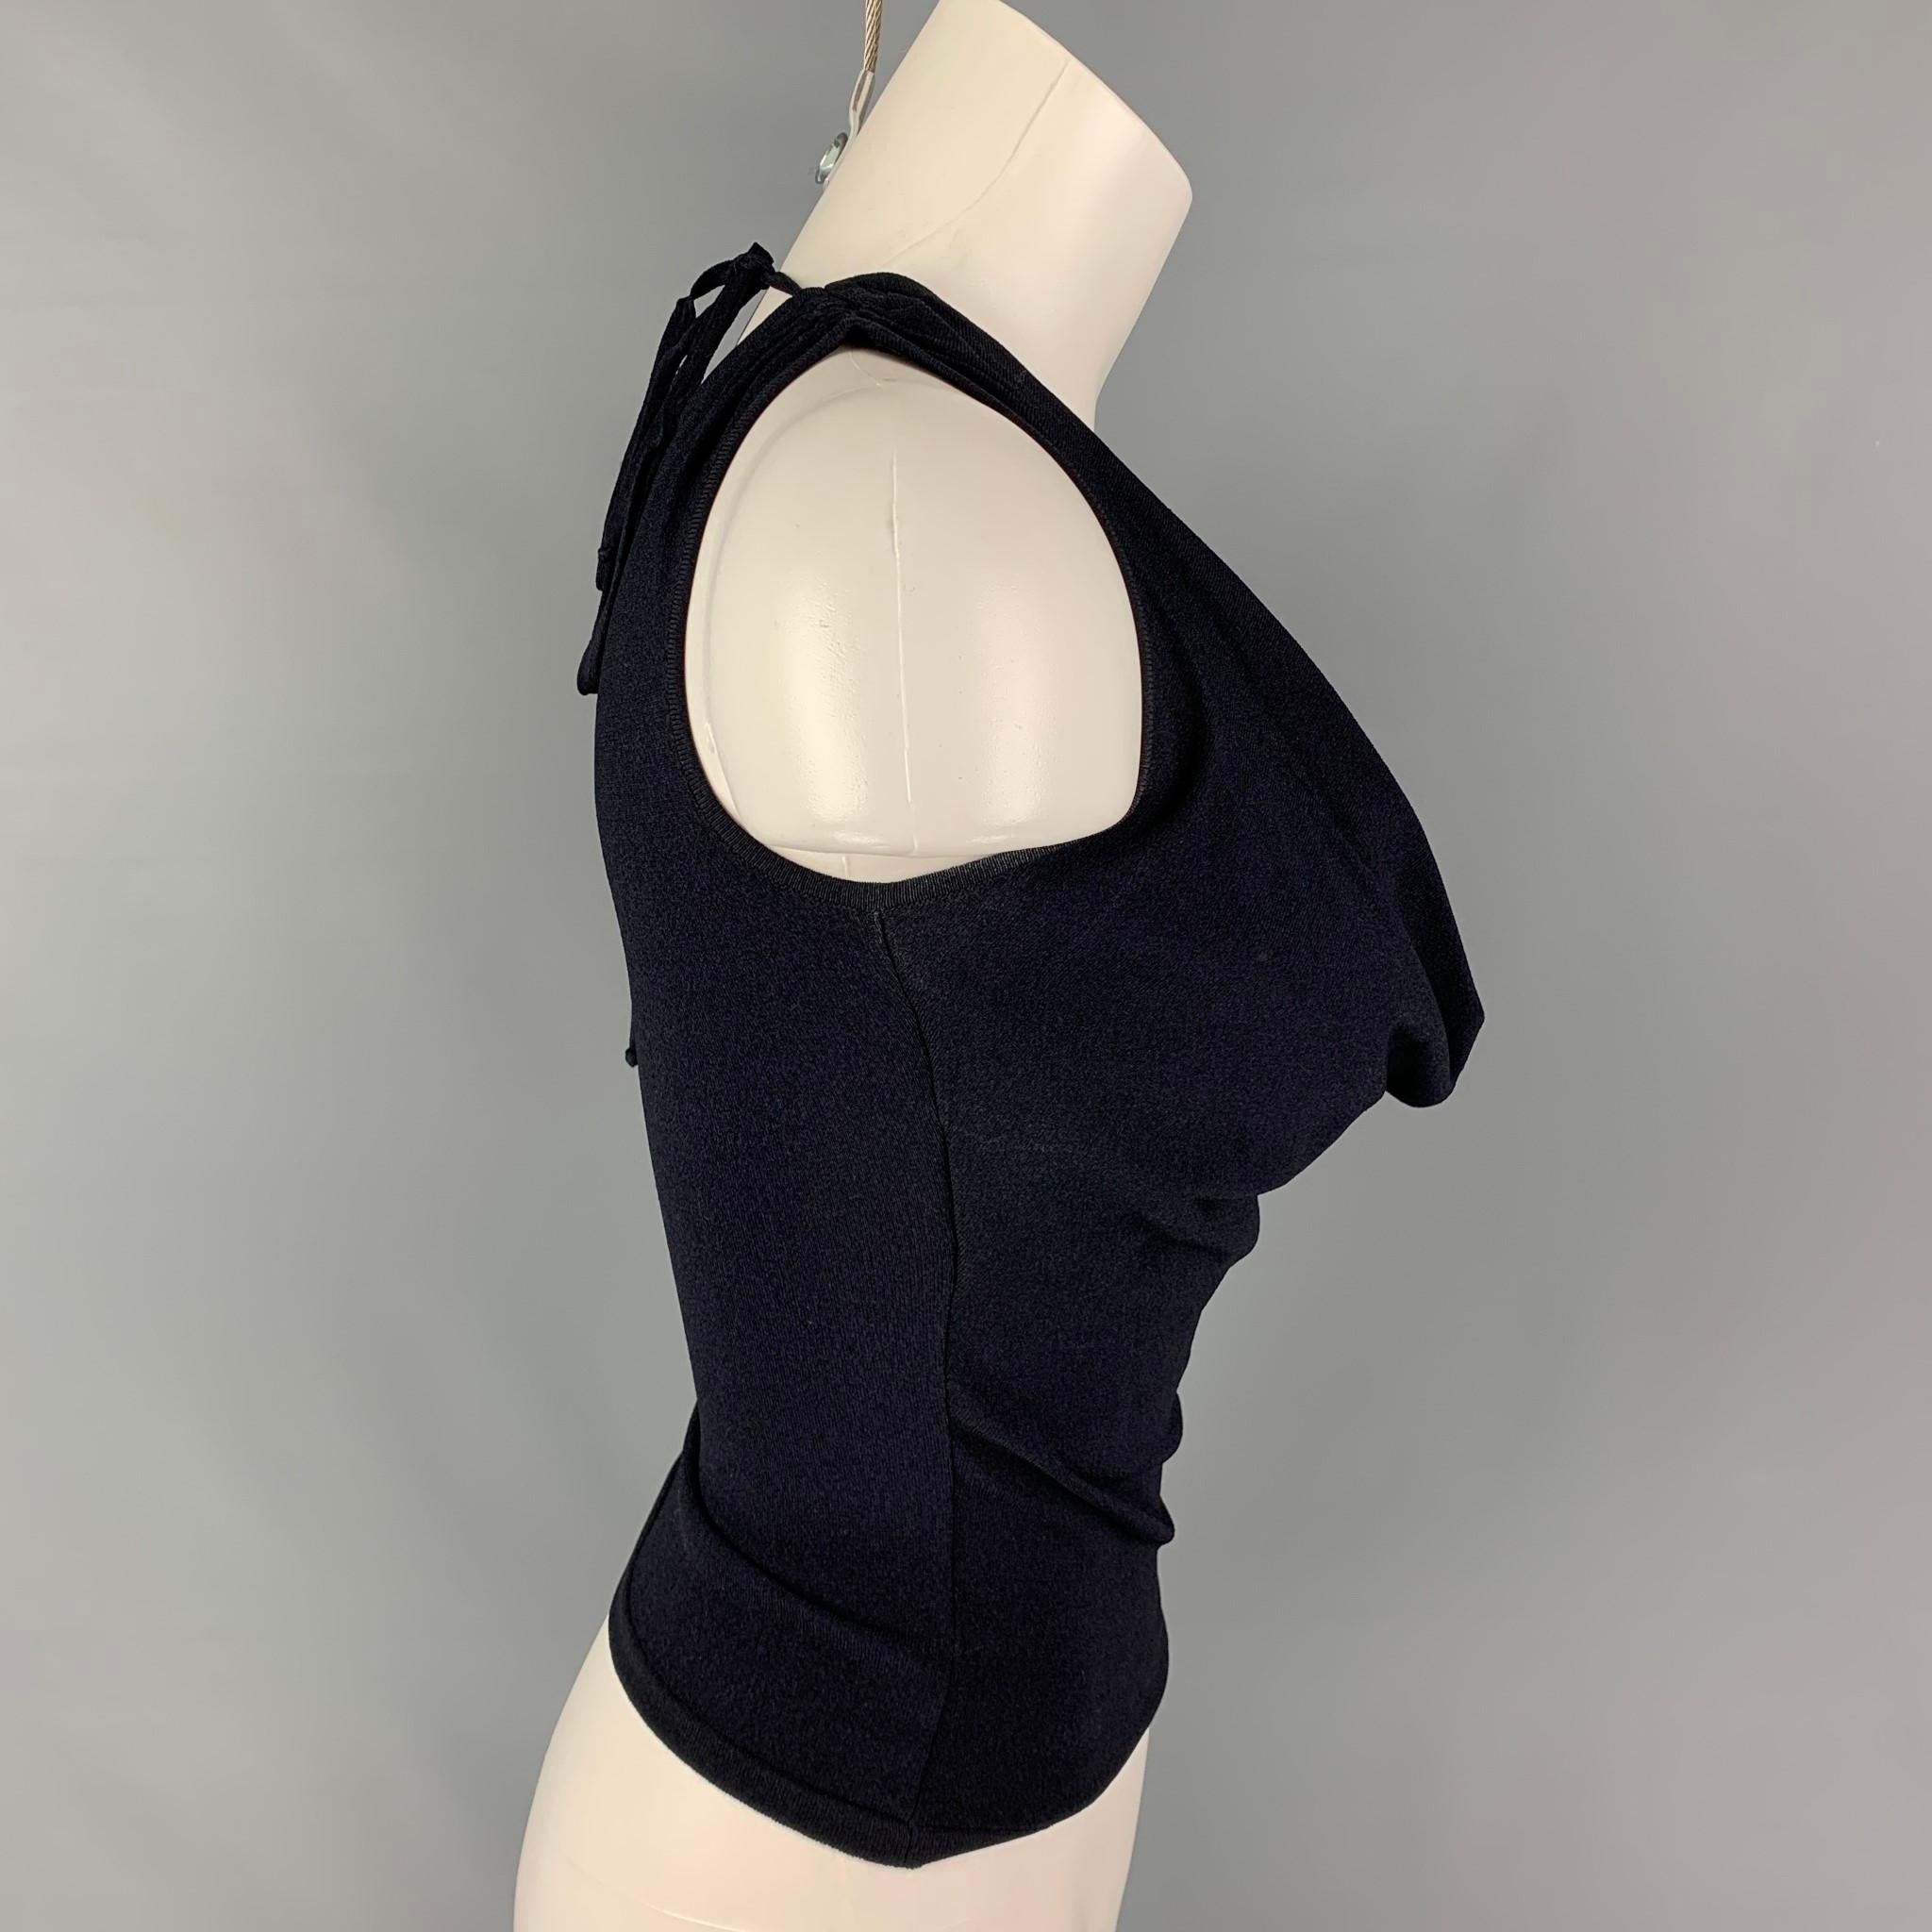 VALENTINO top comes in a navy viscose / polyester featuring a lace sequined panel, v-neck, sleeveless, and a back self tie detail.

Very Good Pre-Owned Condition.
Marked: S

Measurements:

Shoulder: 12.5 in.
Bust: 28 in.
Length: 16.5 in. 